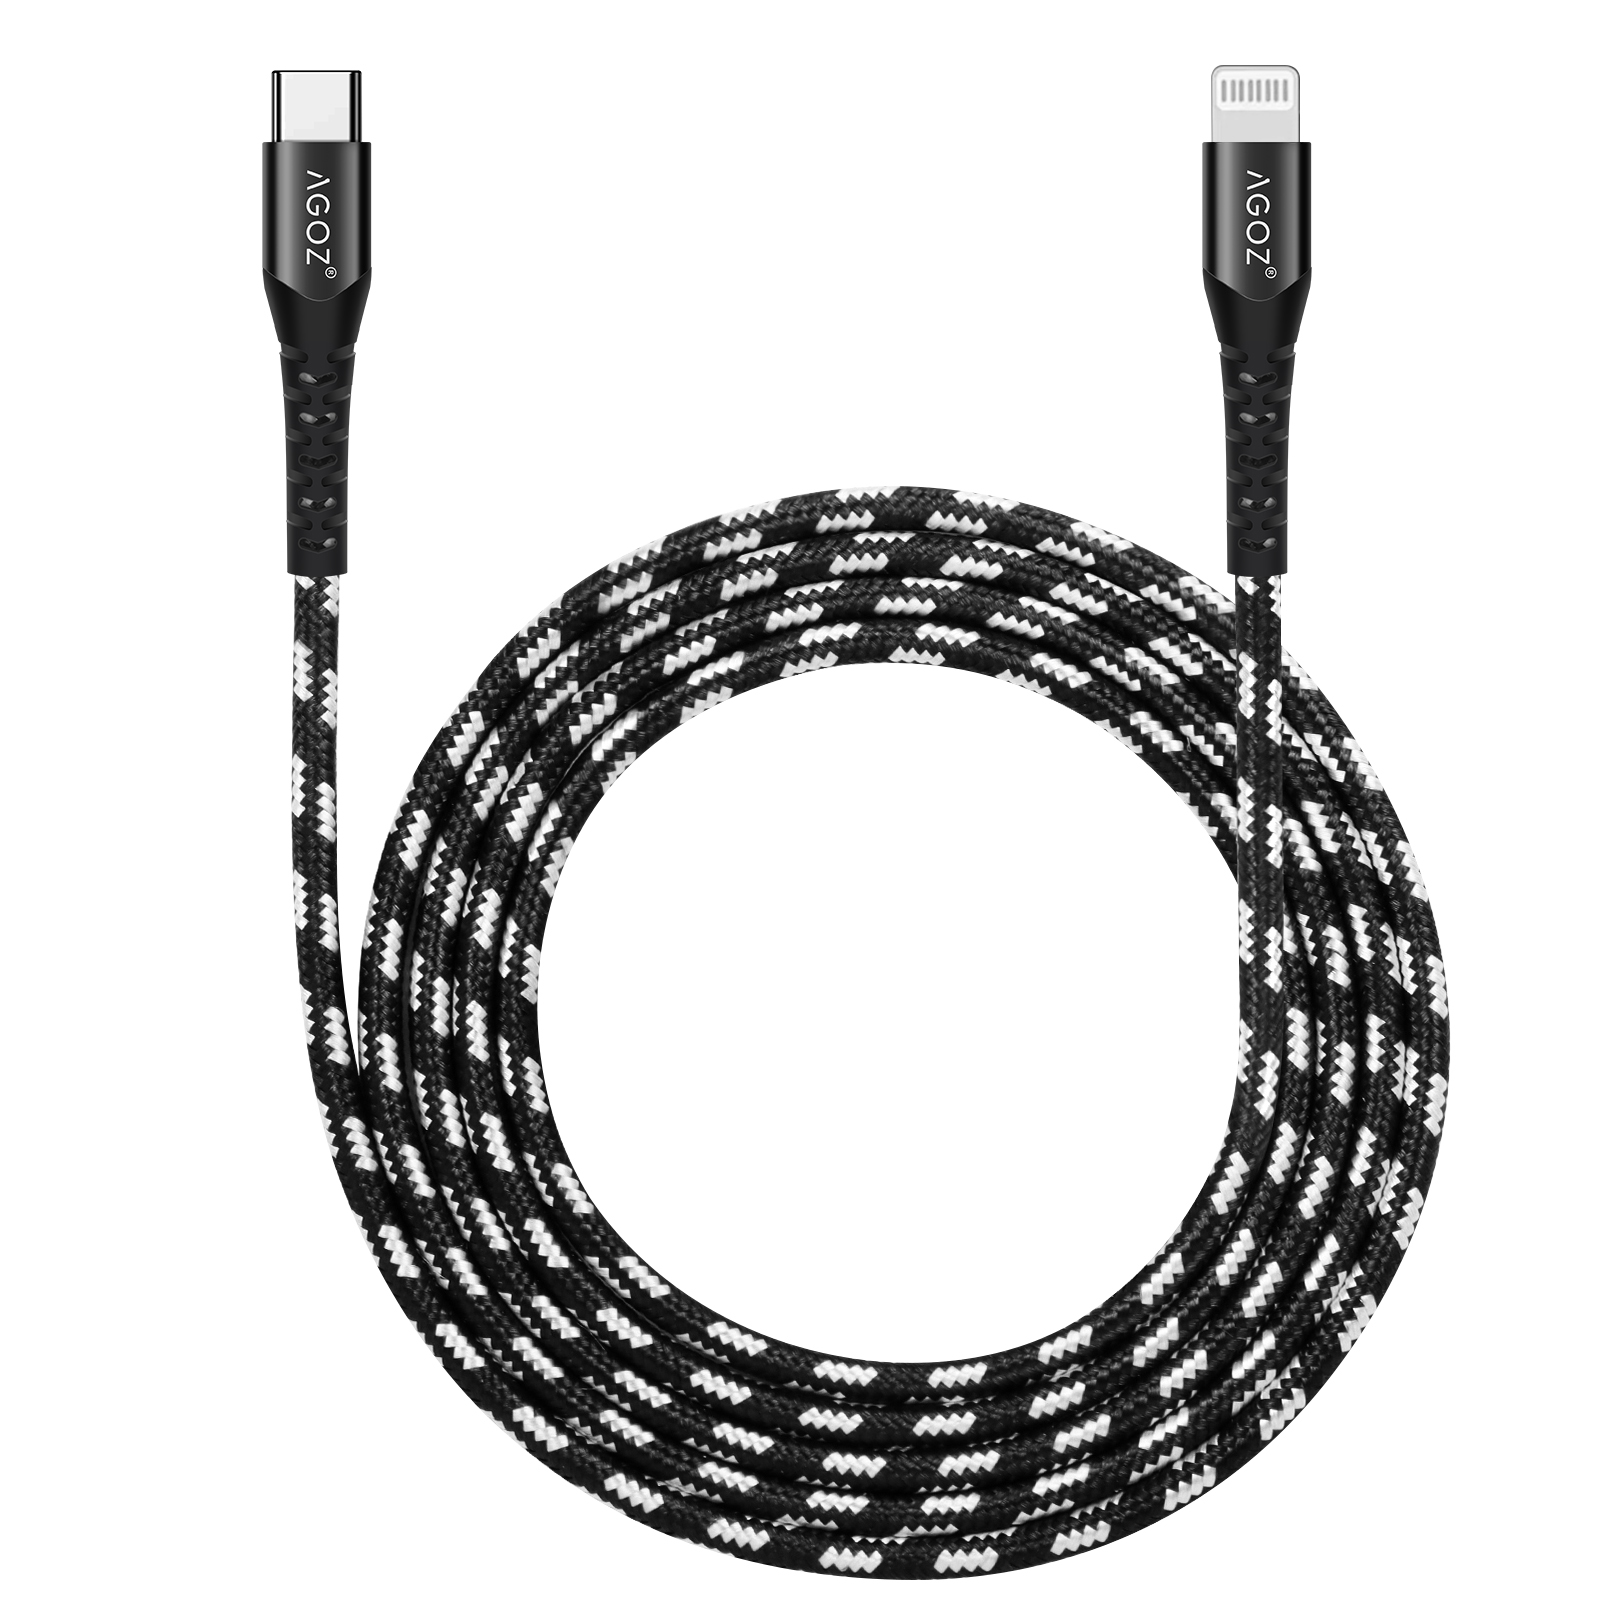 AGOZ 10FT Apple MFI Certified Lightning to USB C Fast Charger Cable, Braided Cord for iPhone 14 Pro Max, 13, 12, iPhone SE, iPhone 11 Pro Max, 8 Plus, 8, 7, 6S, 6, 5, iPhone XS Max, XR, X, XS - image 1 of 8